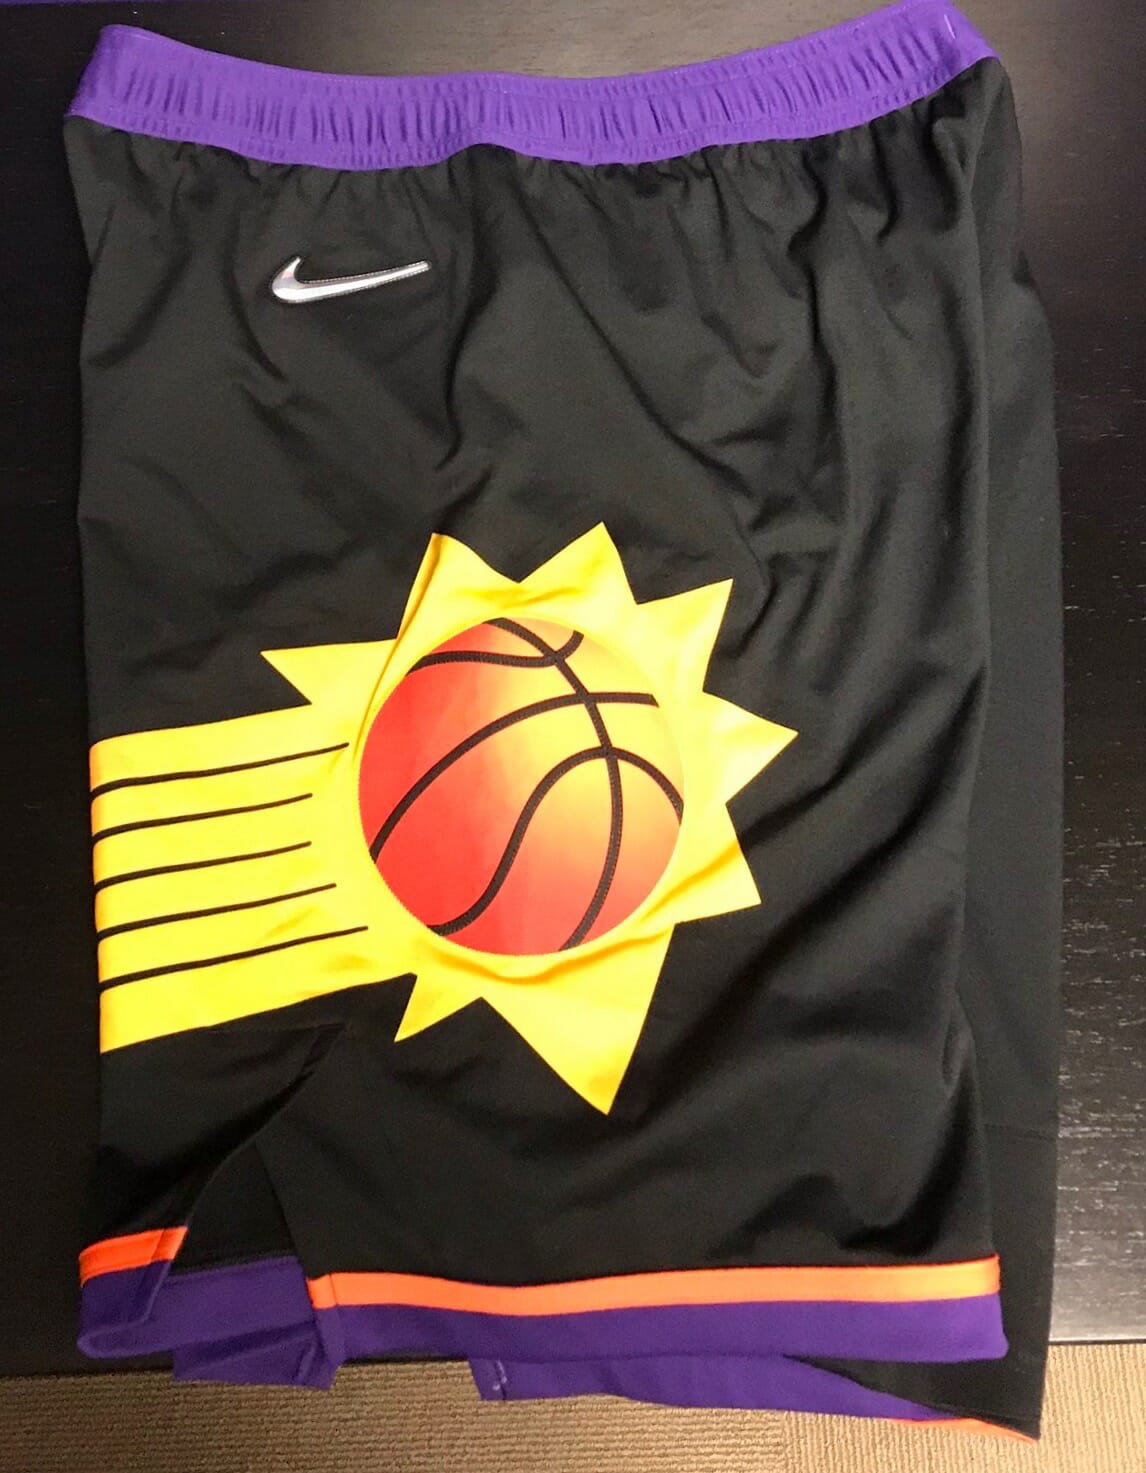 Potential Mash-Up City Edition Jerseys Leaked For 2021-22 NBA Season